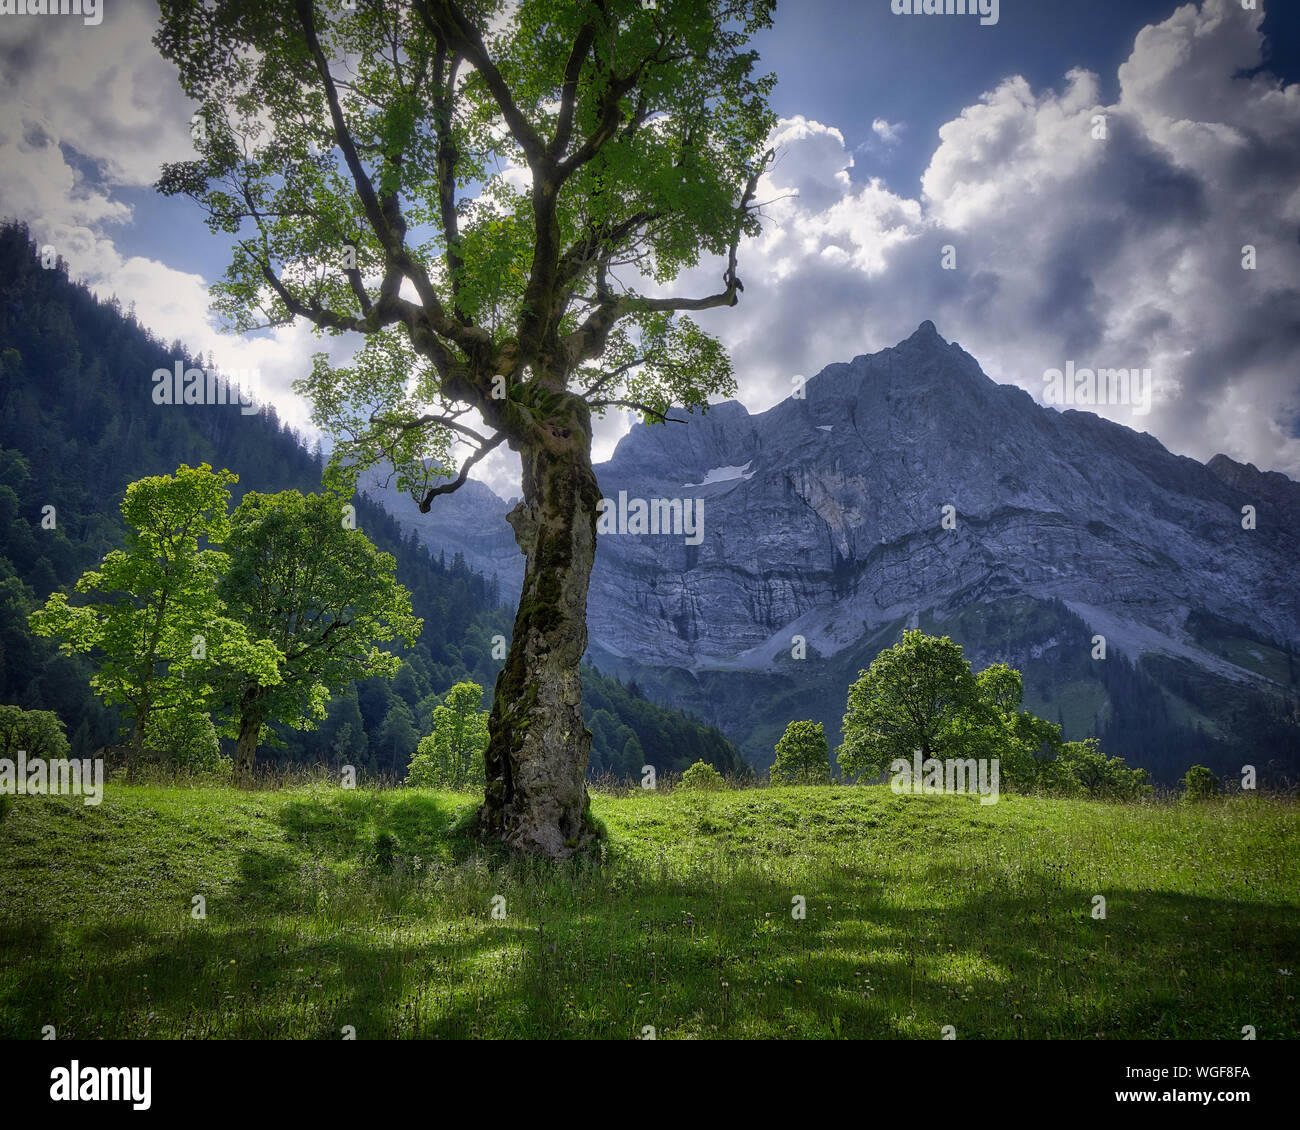 AT - TYROL: Lone Acer Tree at Grosser Ahornboden and Lamsenspitze Mountain  (HDR-Image) Stock Photo